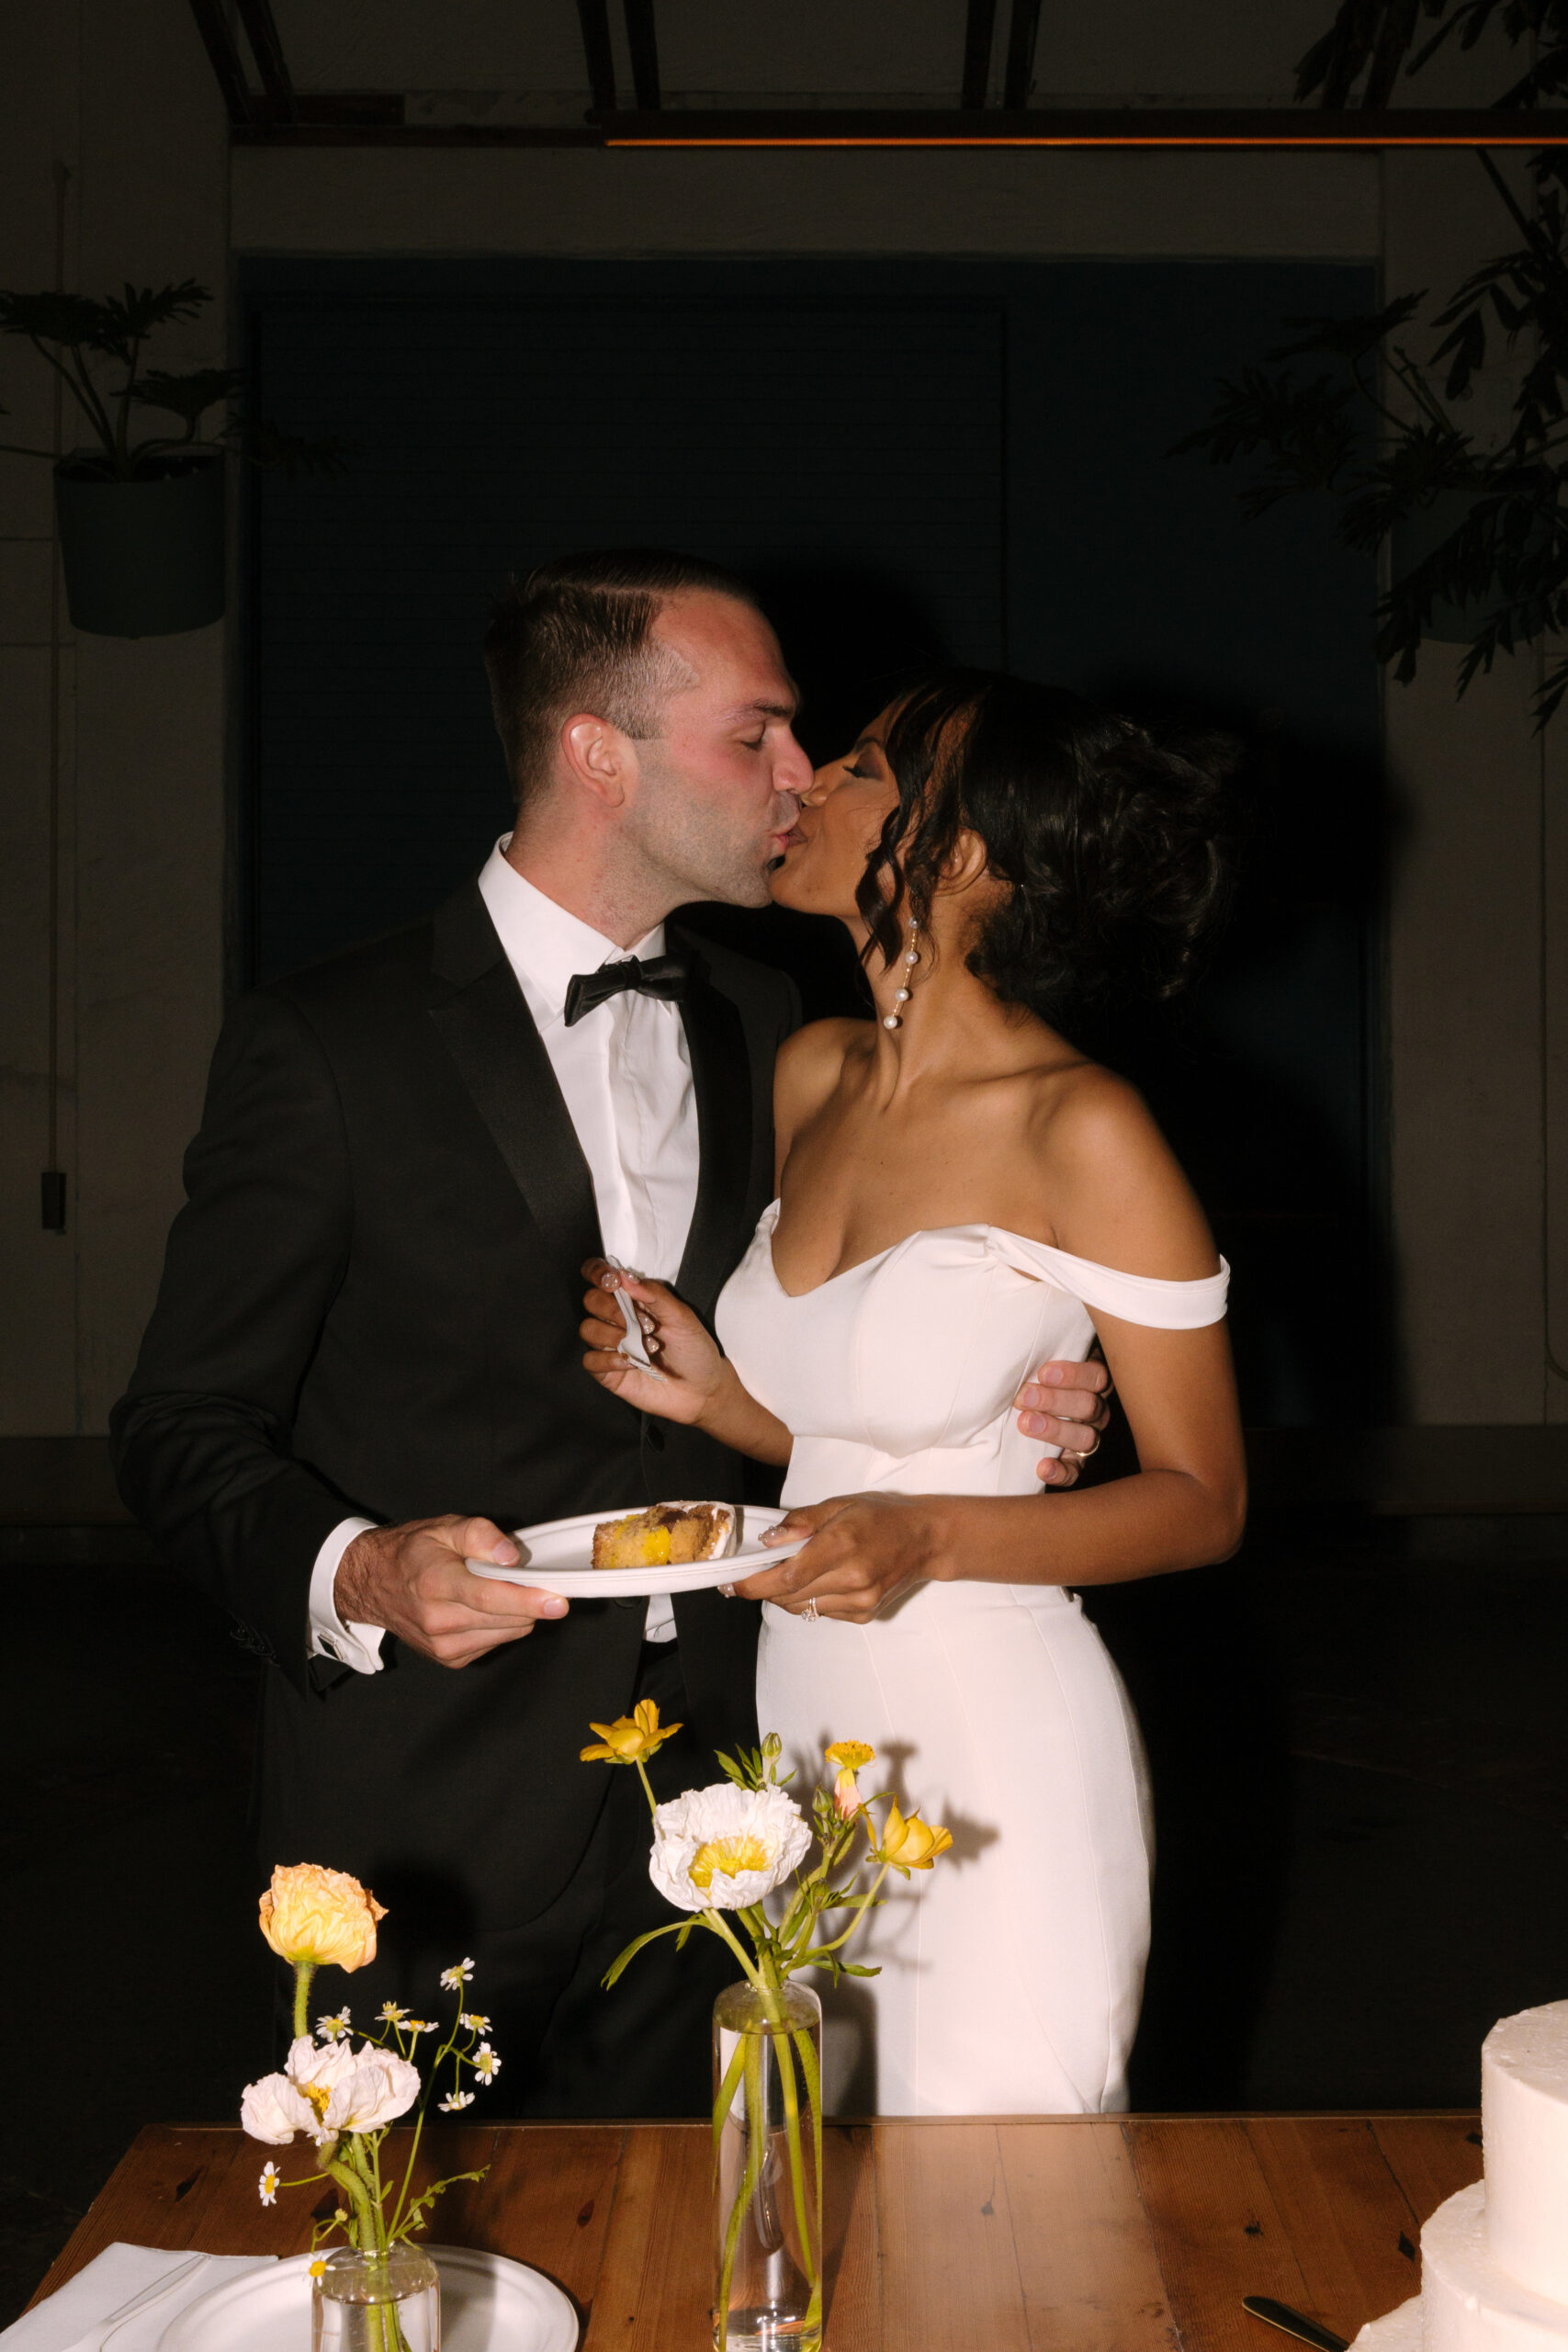 direct flash photo of bride and groom kissing after sharing a bite of their wedding cake